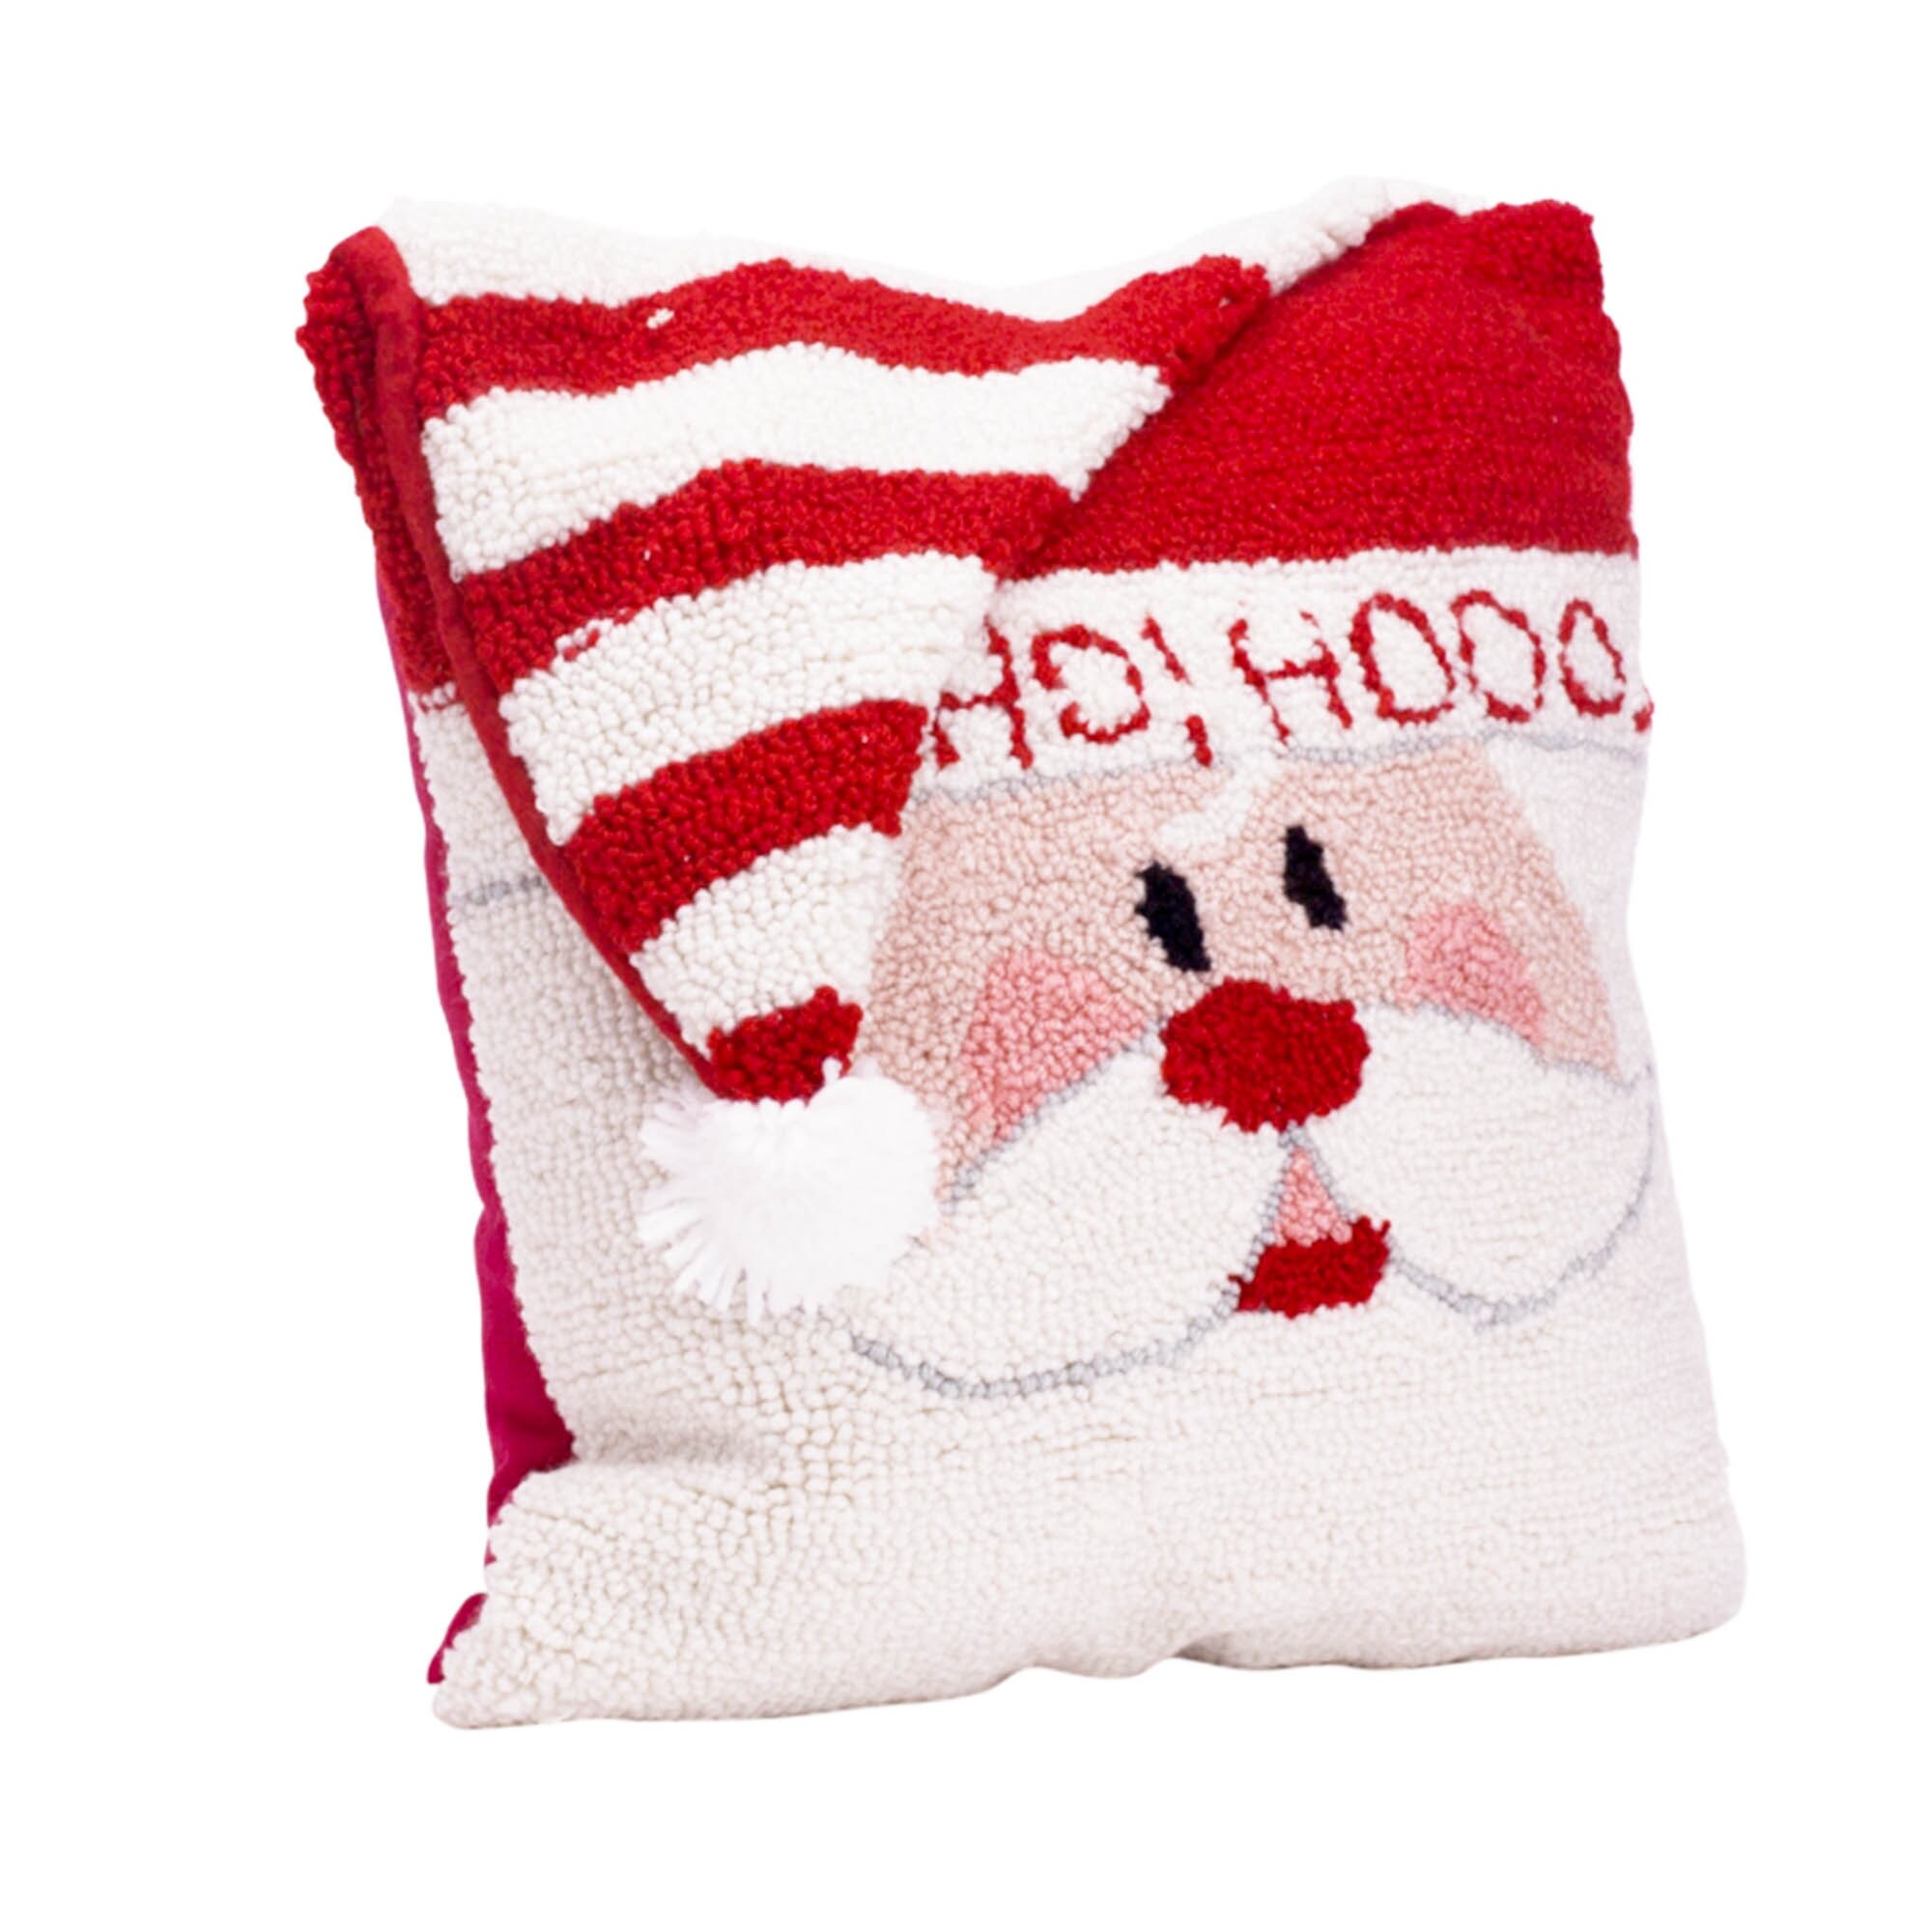 https://ak1.ostkcdn.com/images/products/is/images/direct/95f9bea3c27119af2d7566ad04f65ab22dcb05ef/Glitzhome-14%22L-Hooked-3D-Christmas-Pillow.jpg